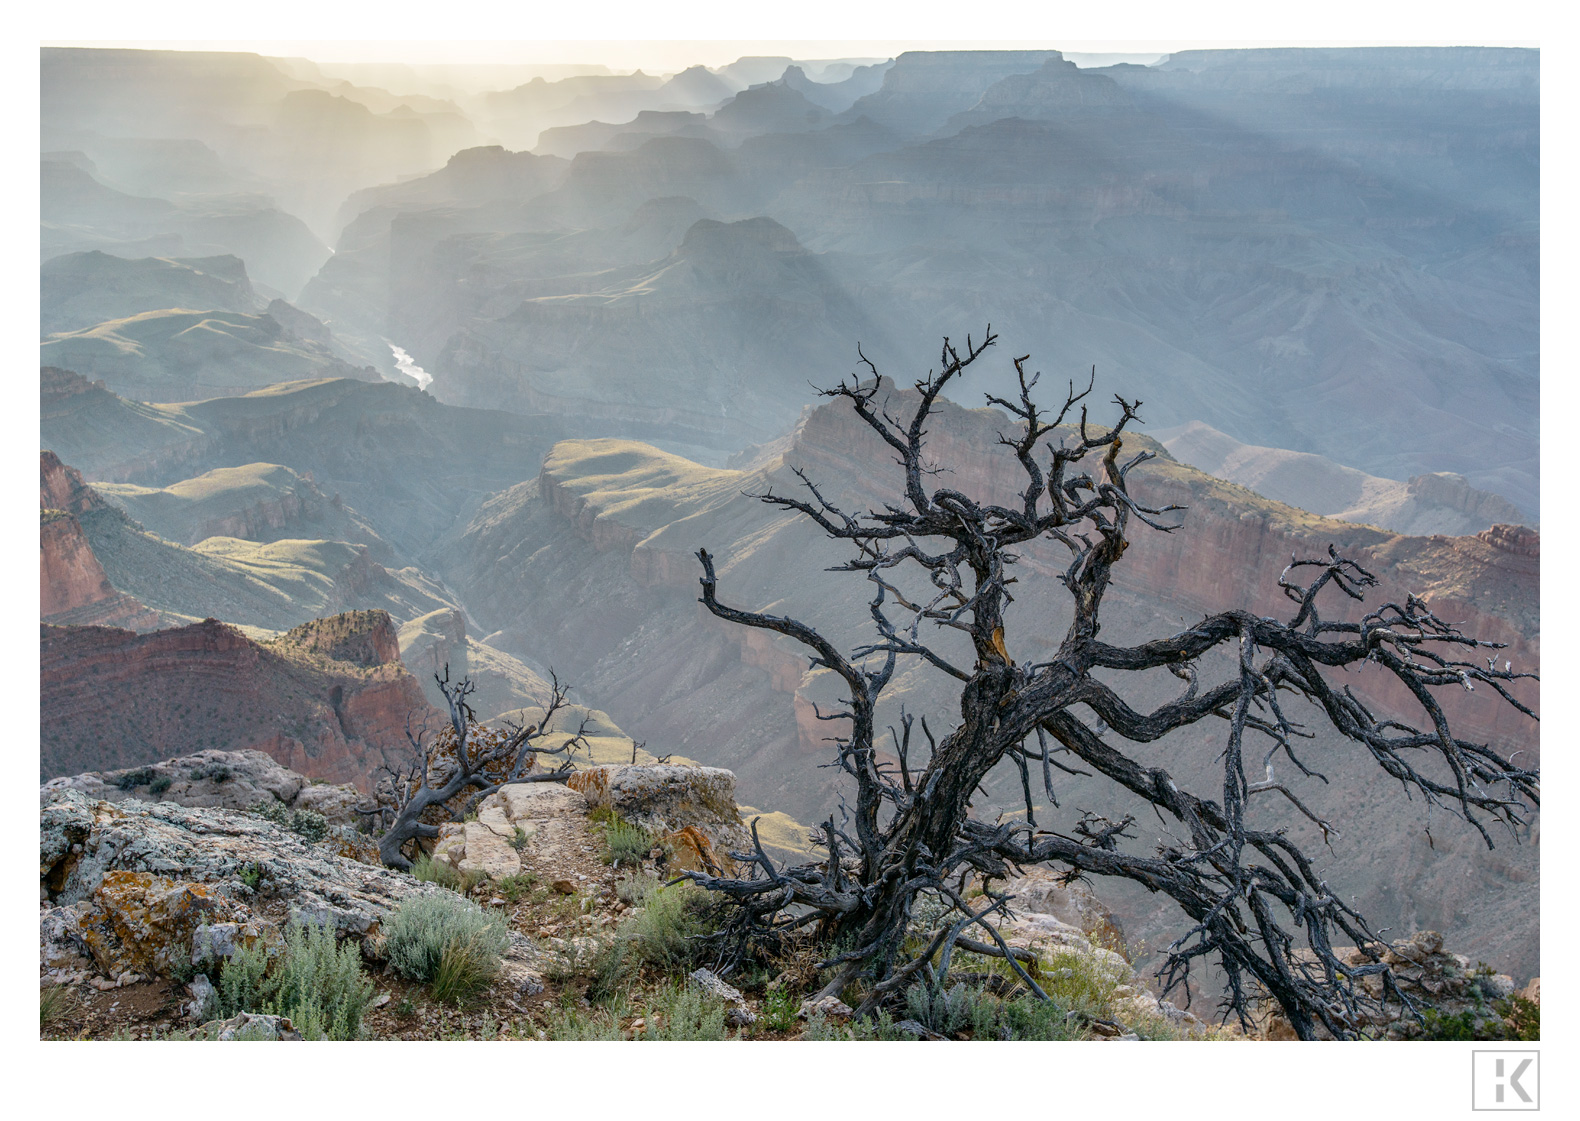 After the Storm, Grand Canyon, 2015